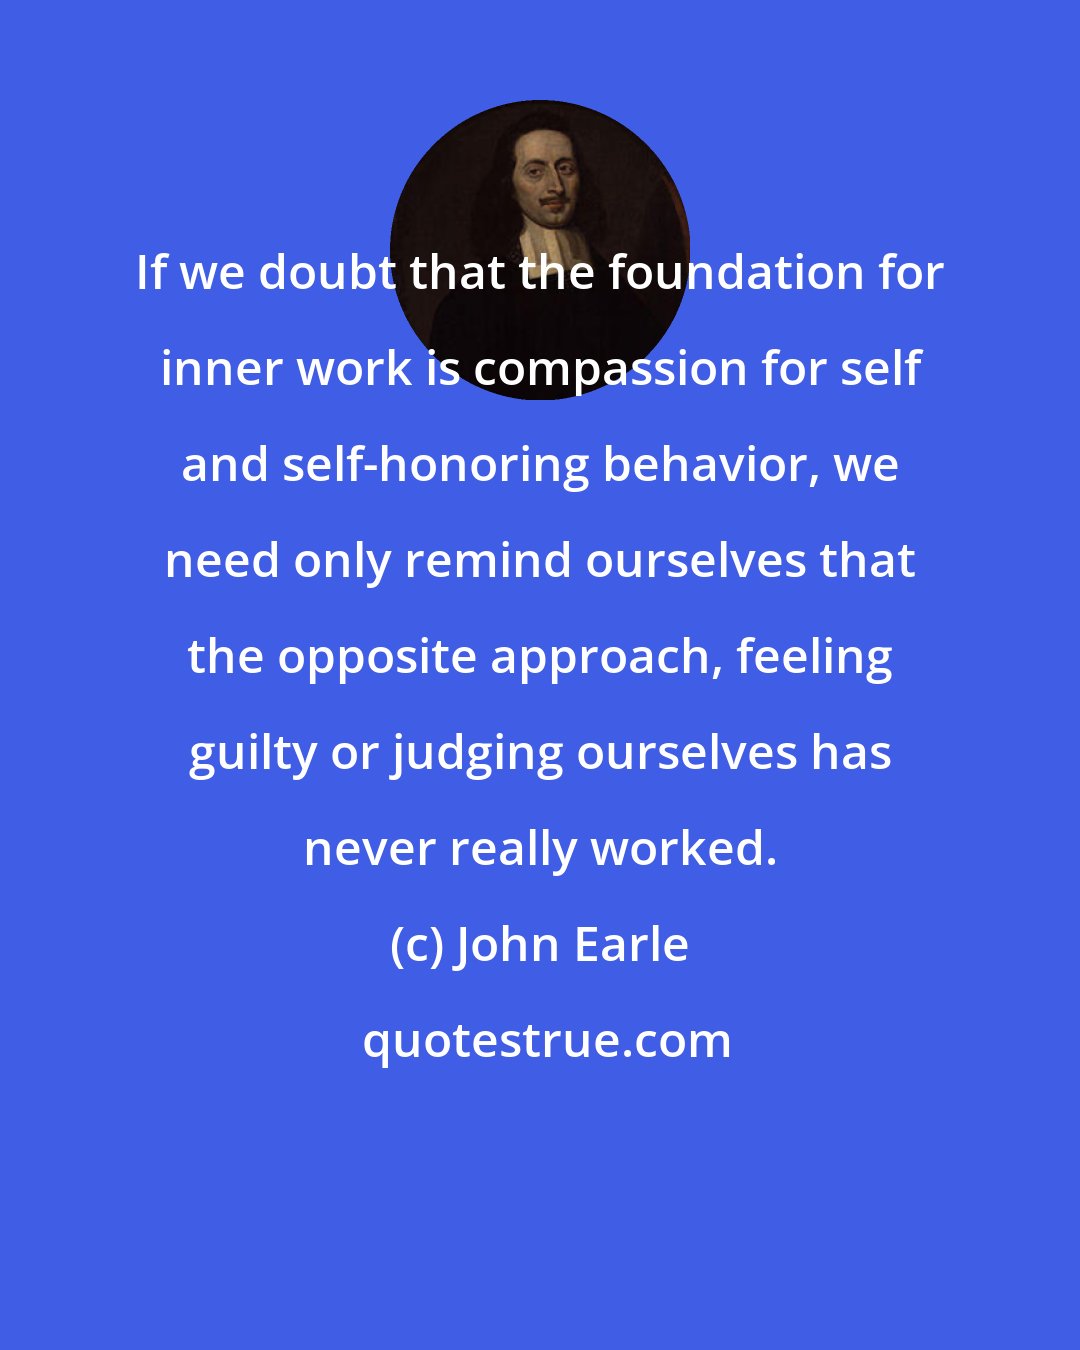 John Earle: If we doubt that the foundation for inner work is compassion for self and self-honoring behavior, we need only remind ourselves that the opposite approach, feeling guilty or judging ourselves has never really worked.